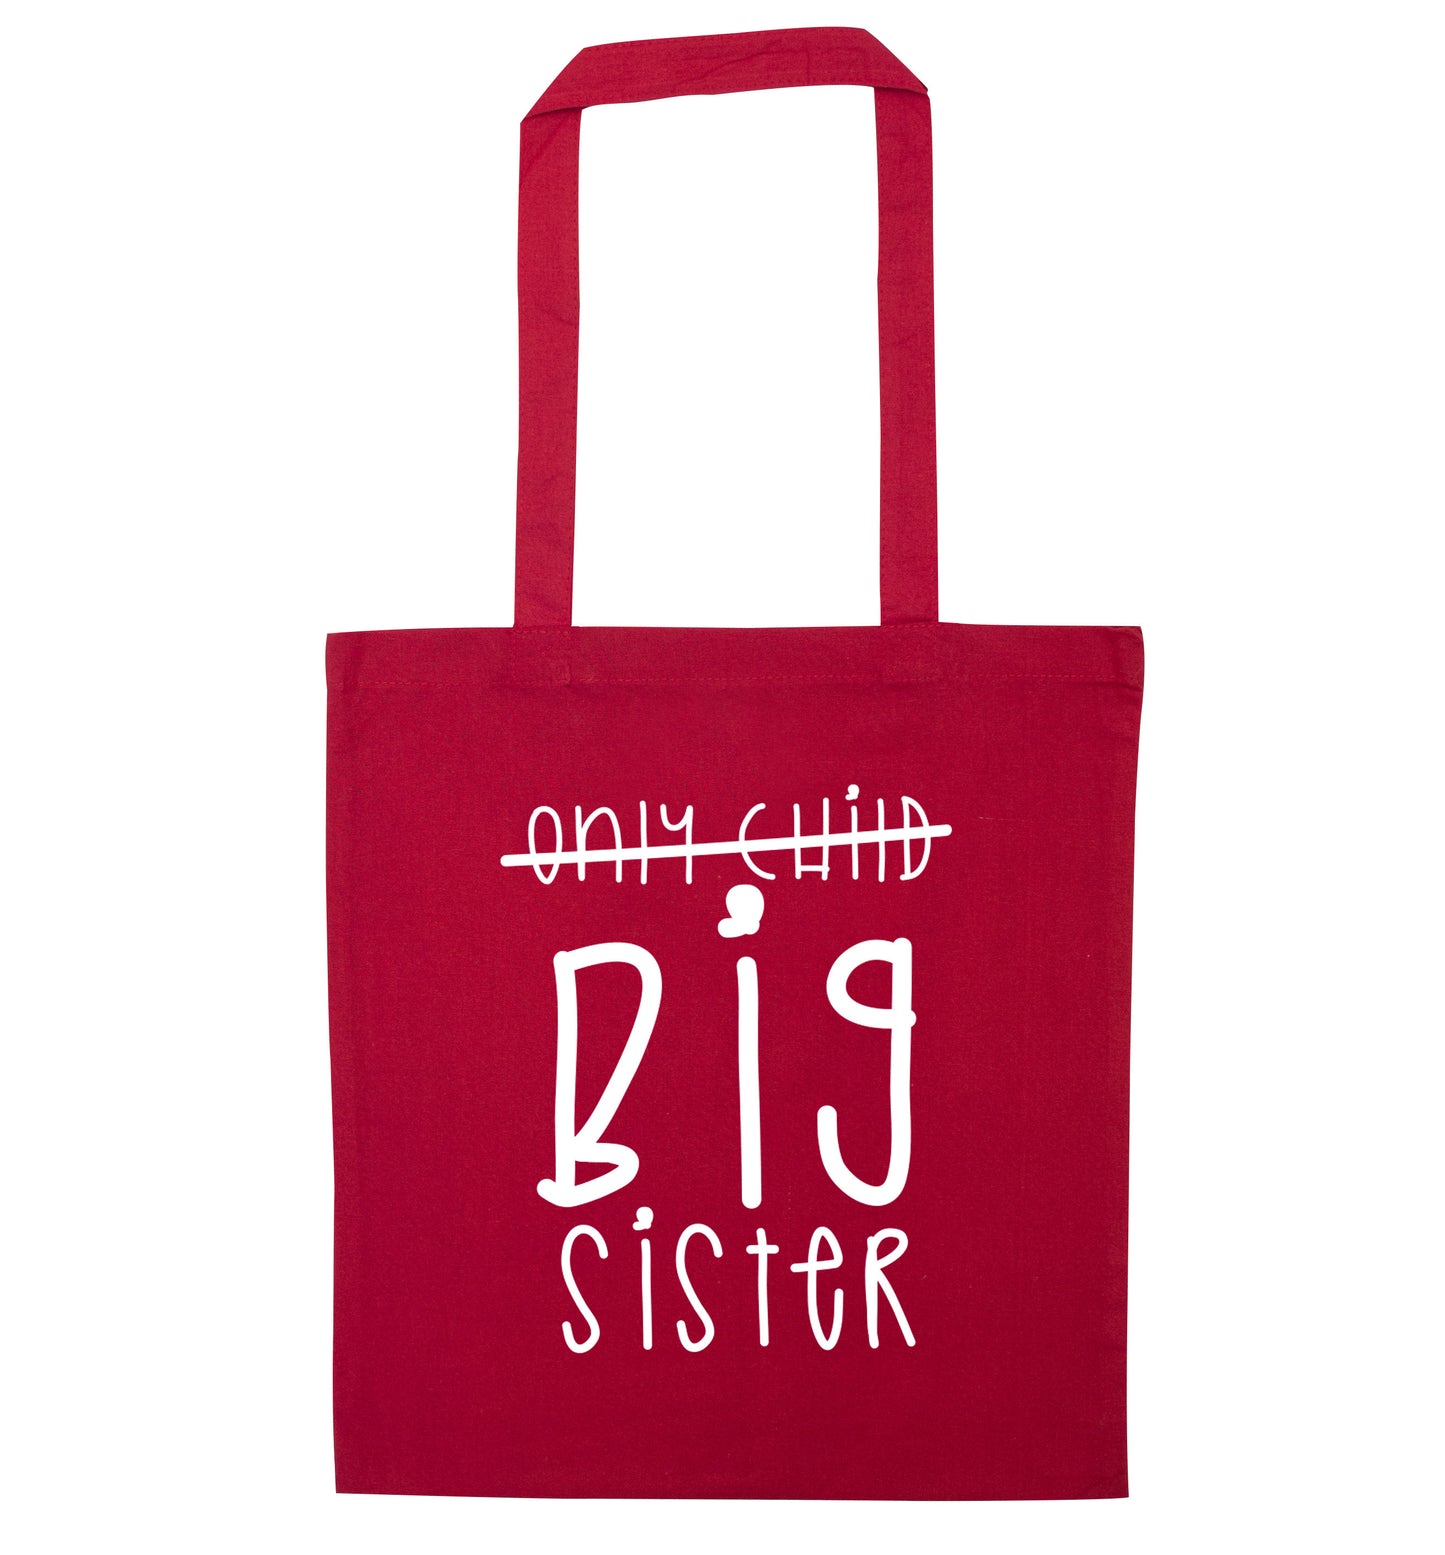 Only child big sister red tote bag